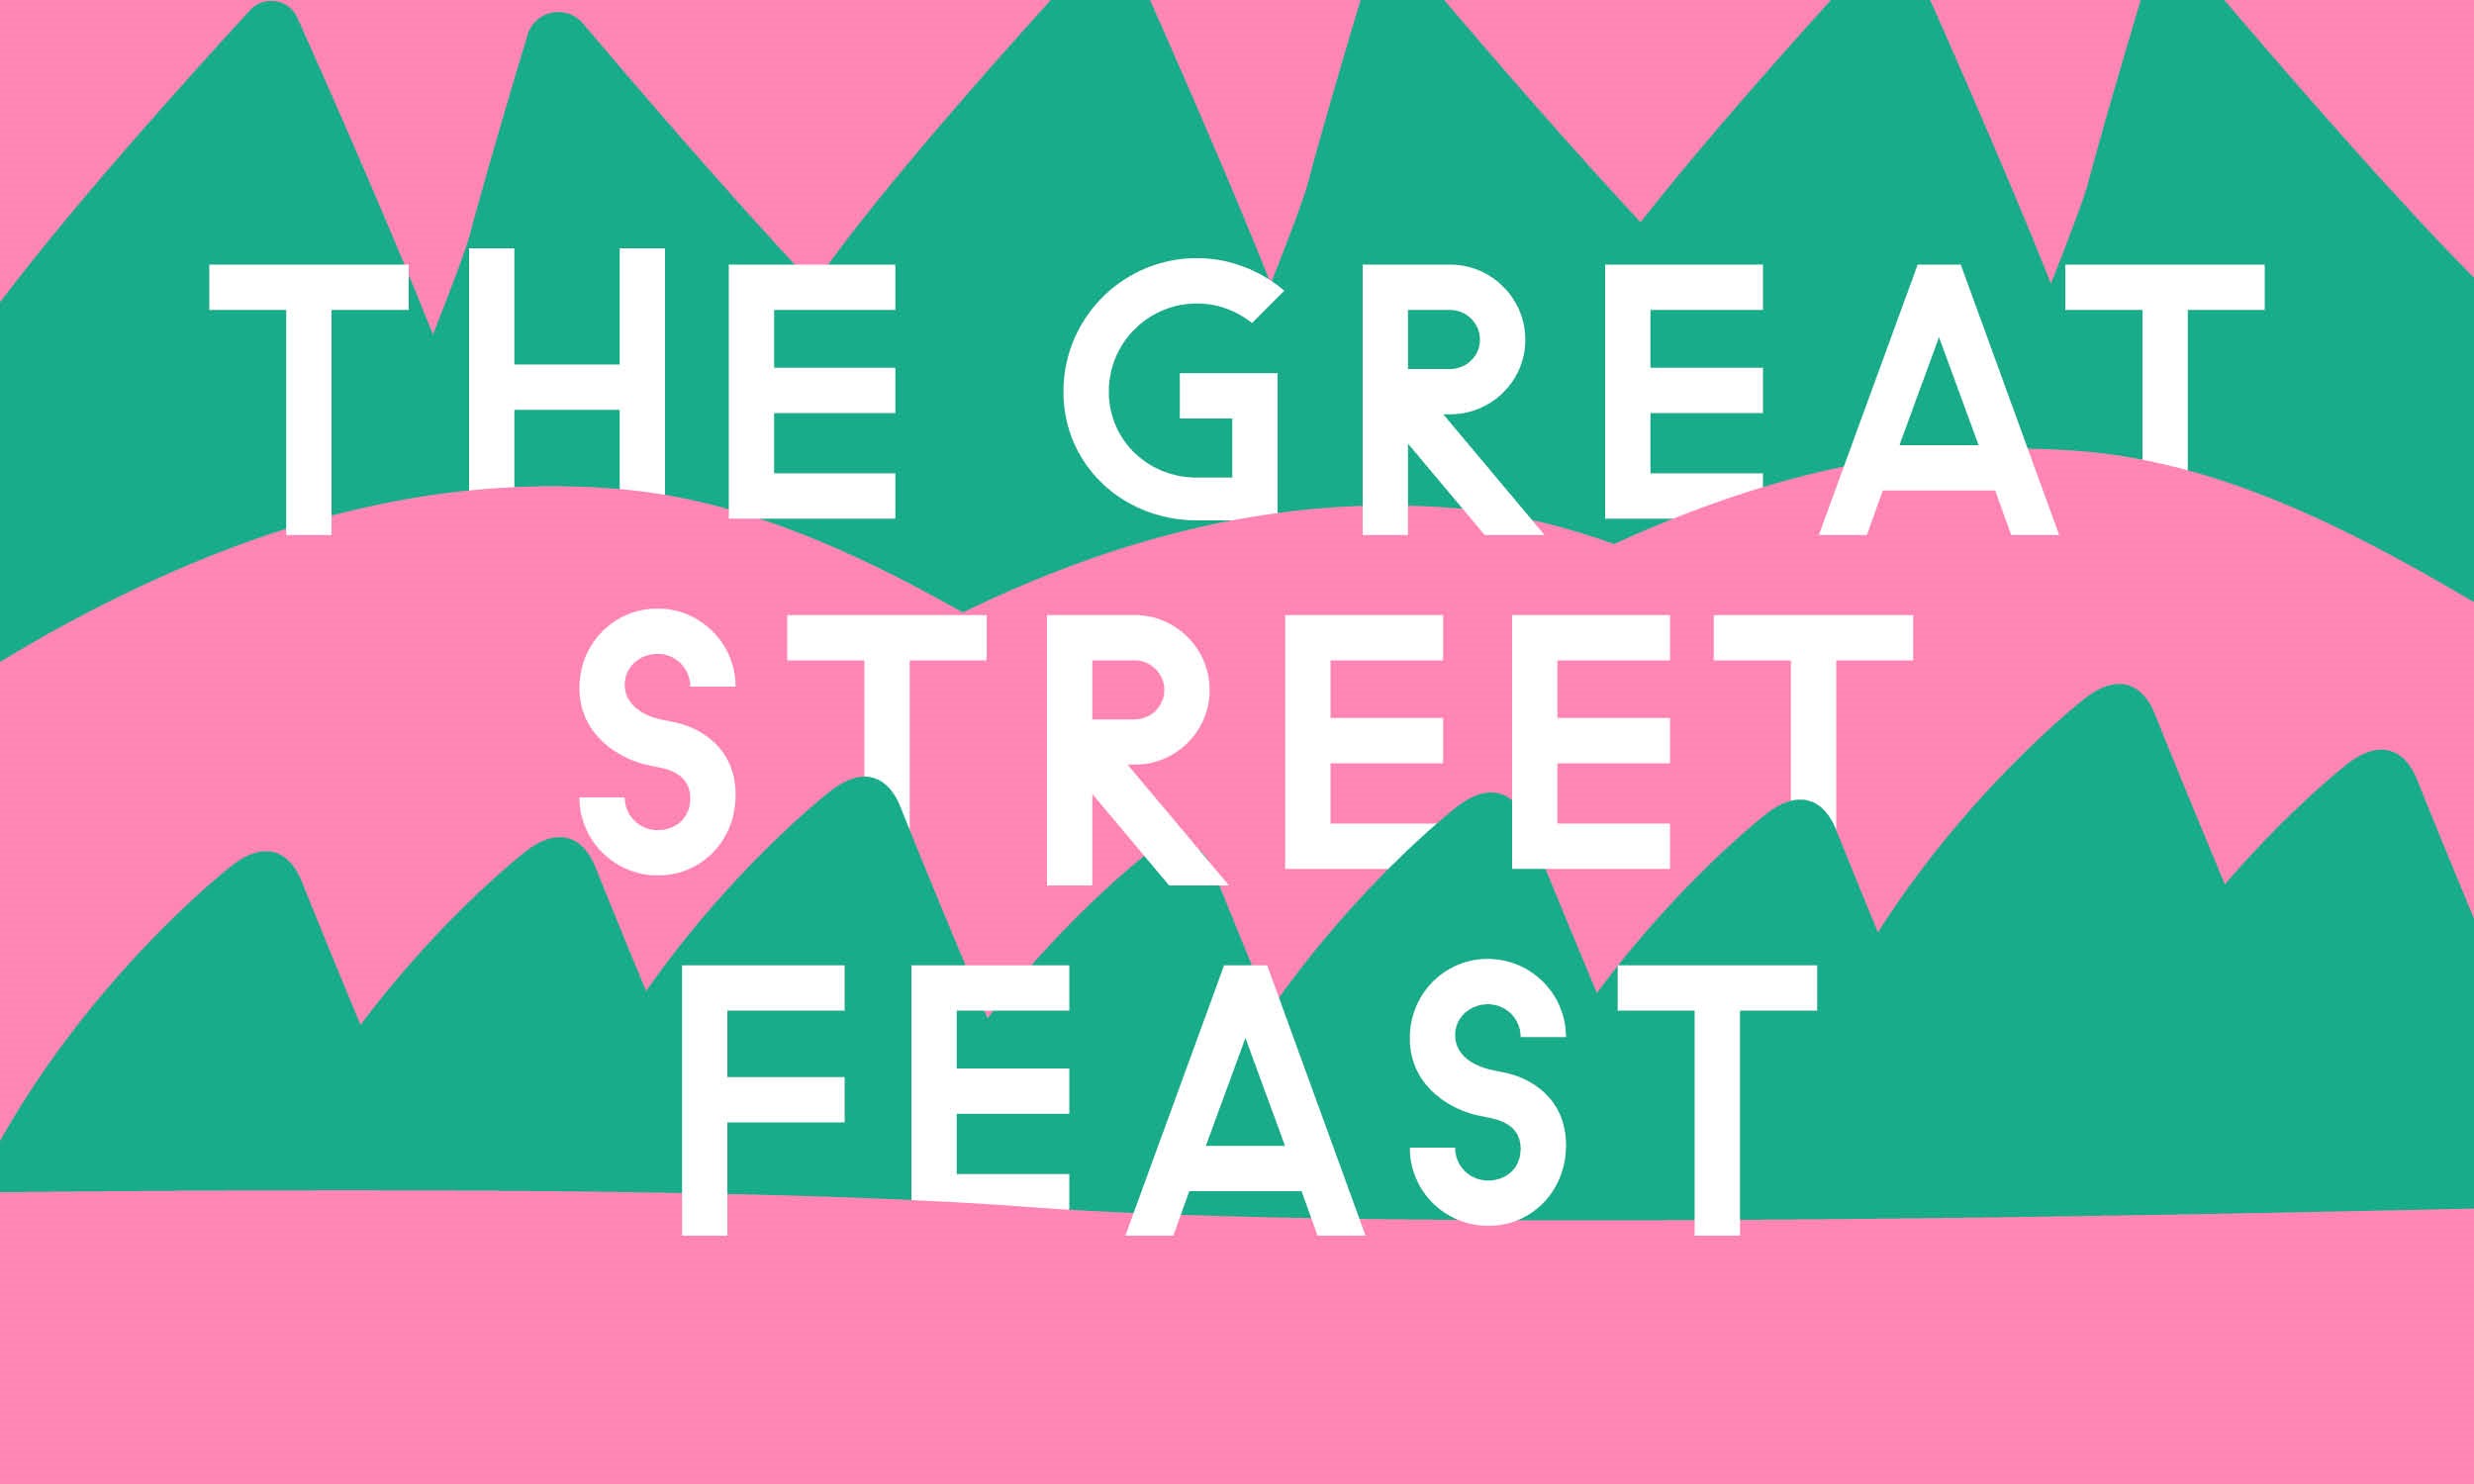 The Great Street Feast by Freedom from Torture